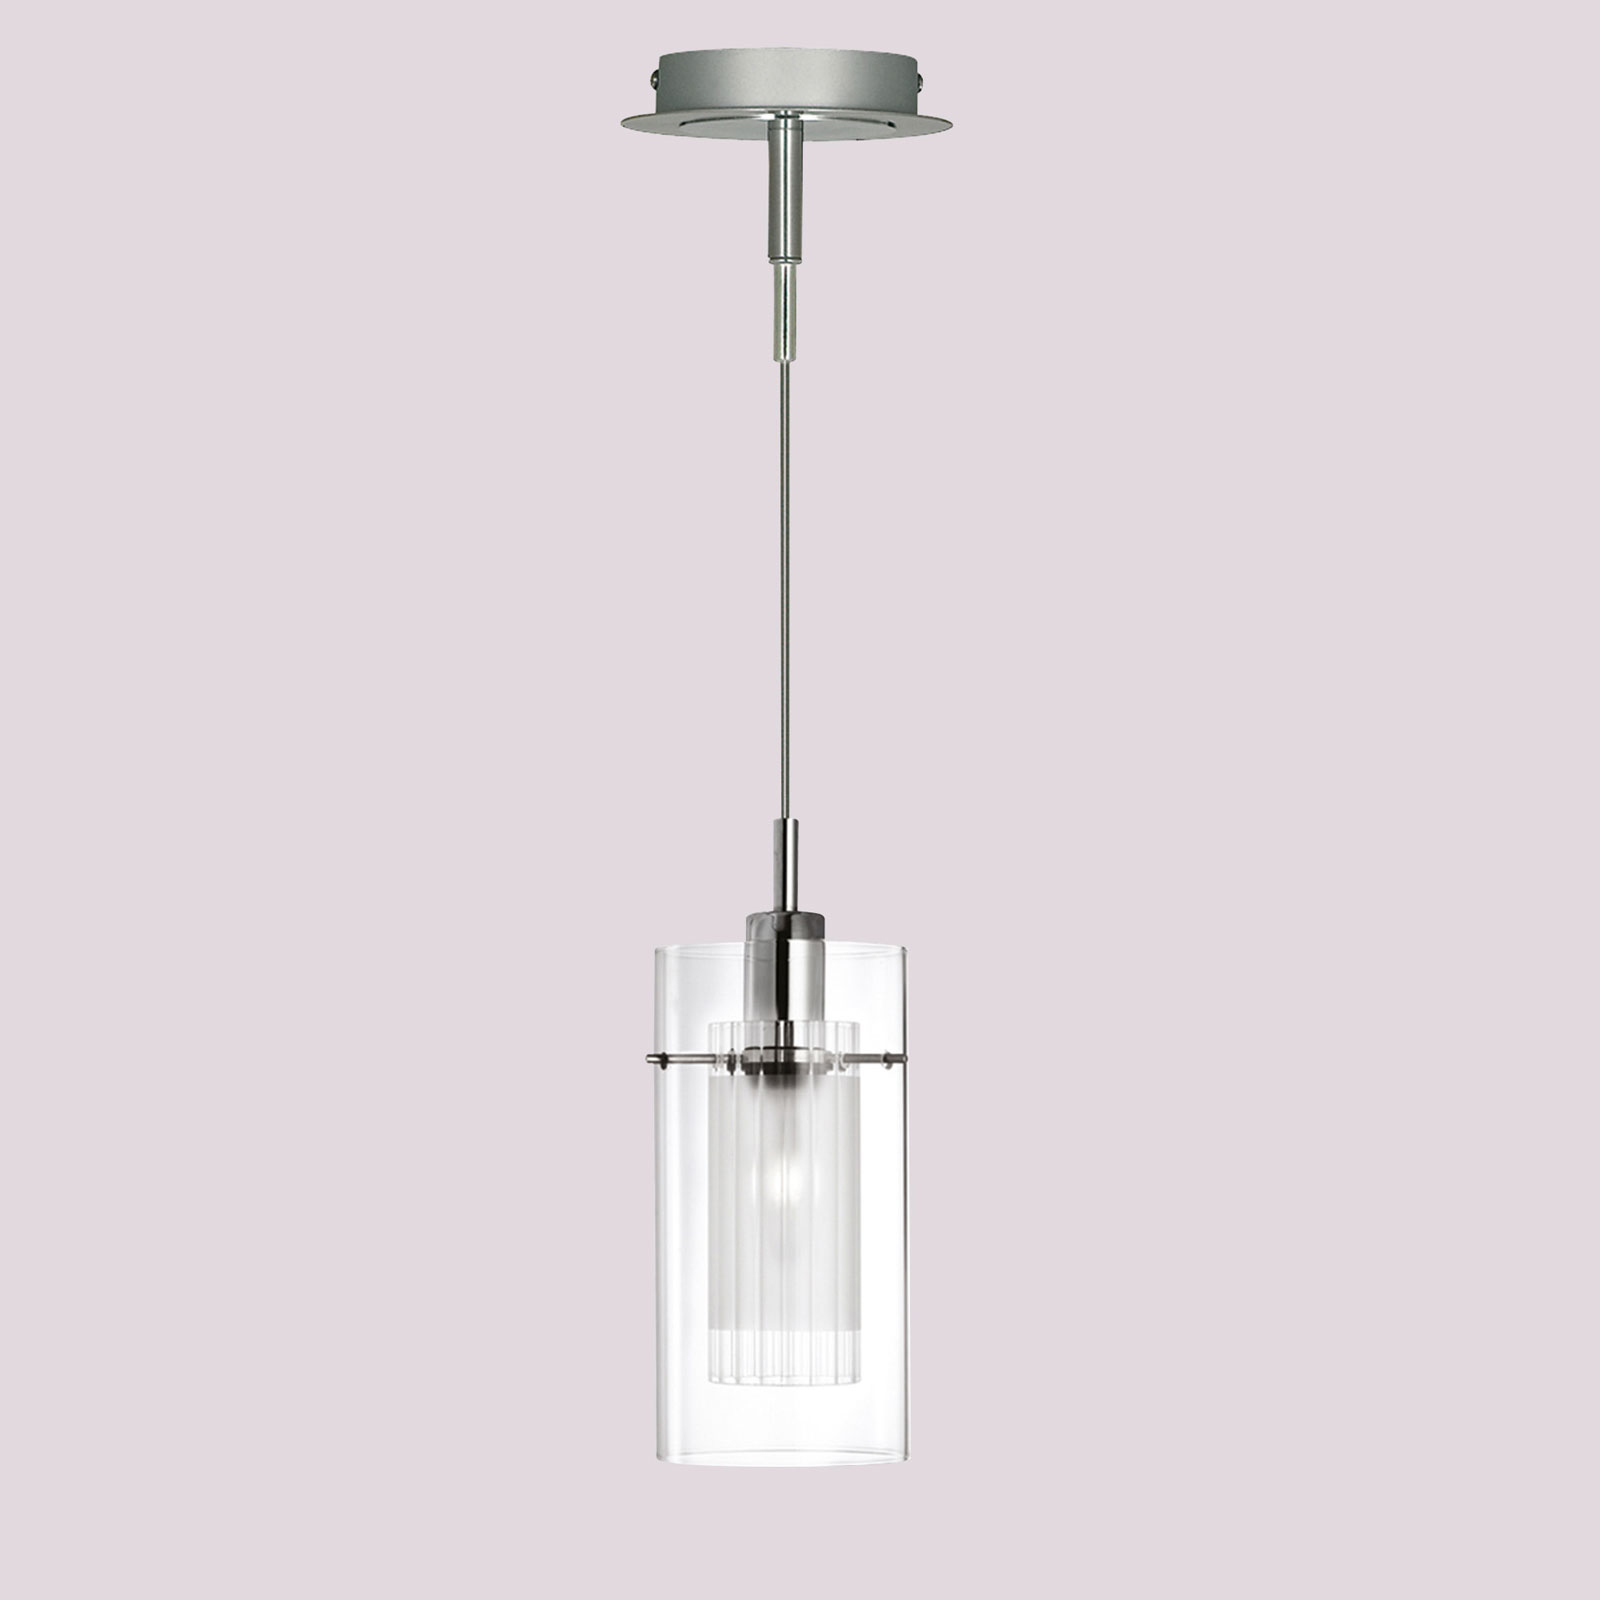 Duo 1 decorative hanging light, one-bulb